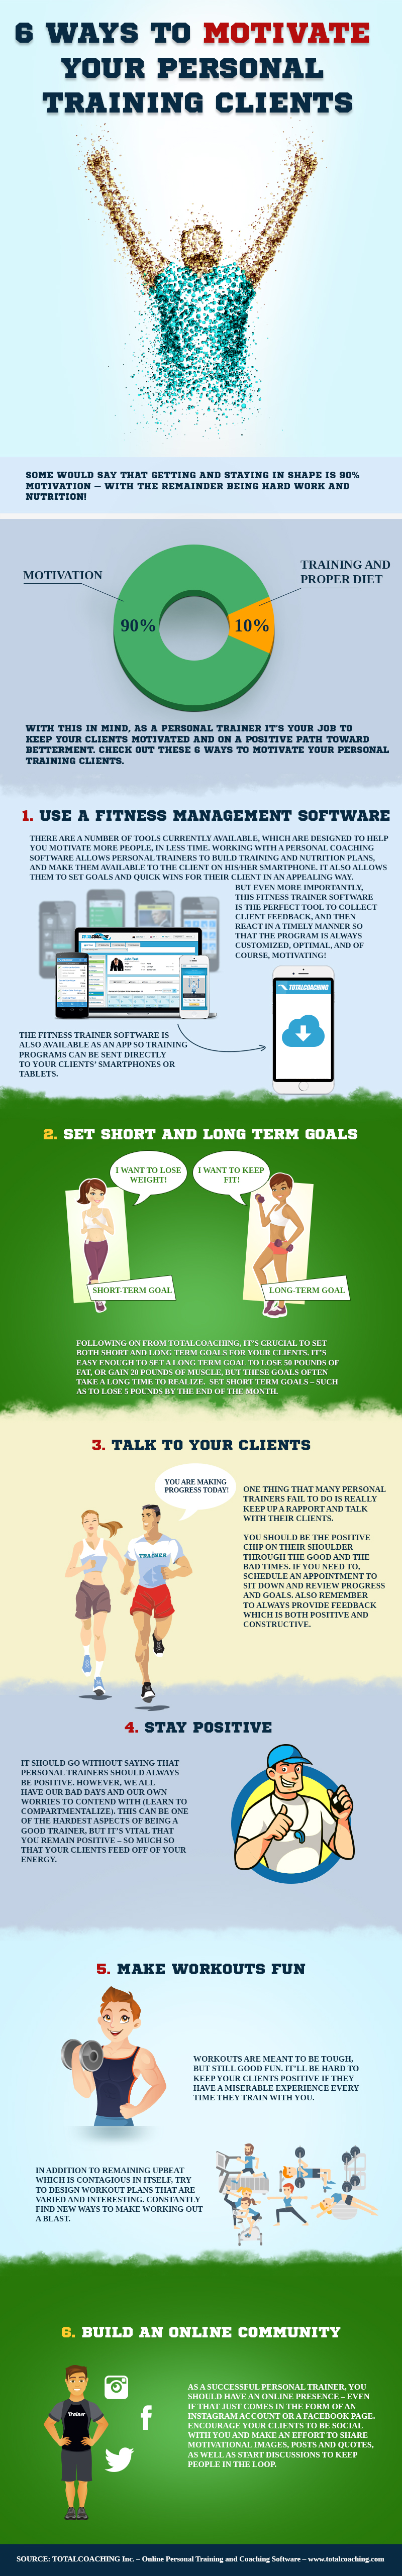 Infographic - 6 Ways to Motivate Your Personal Training Clients (And Keep Your Clients Satisfied)